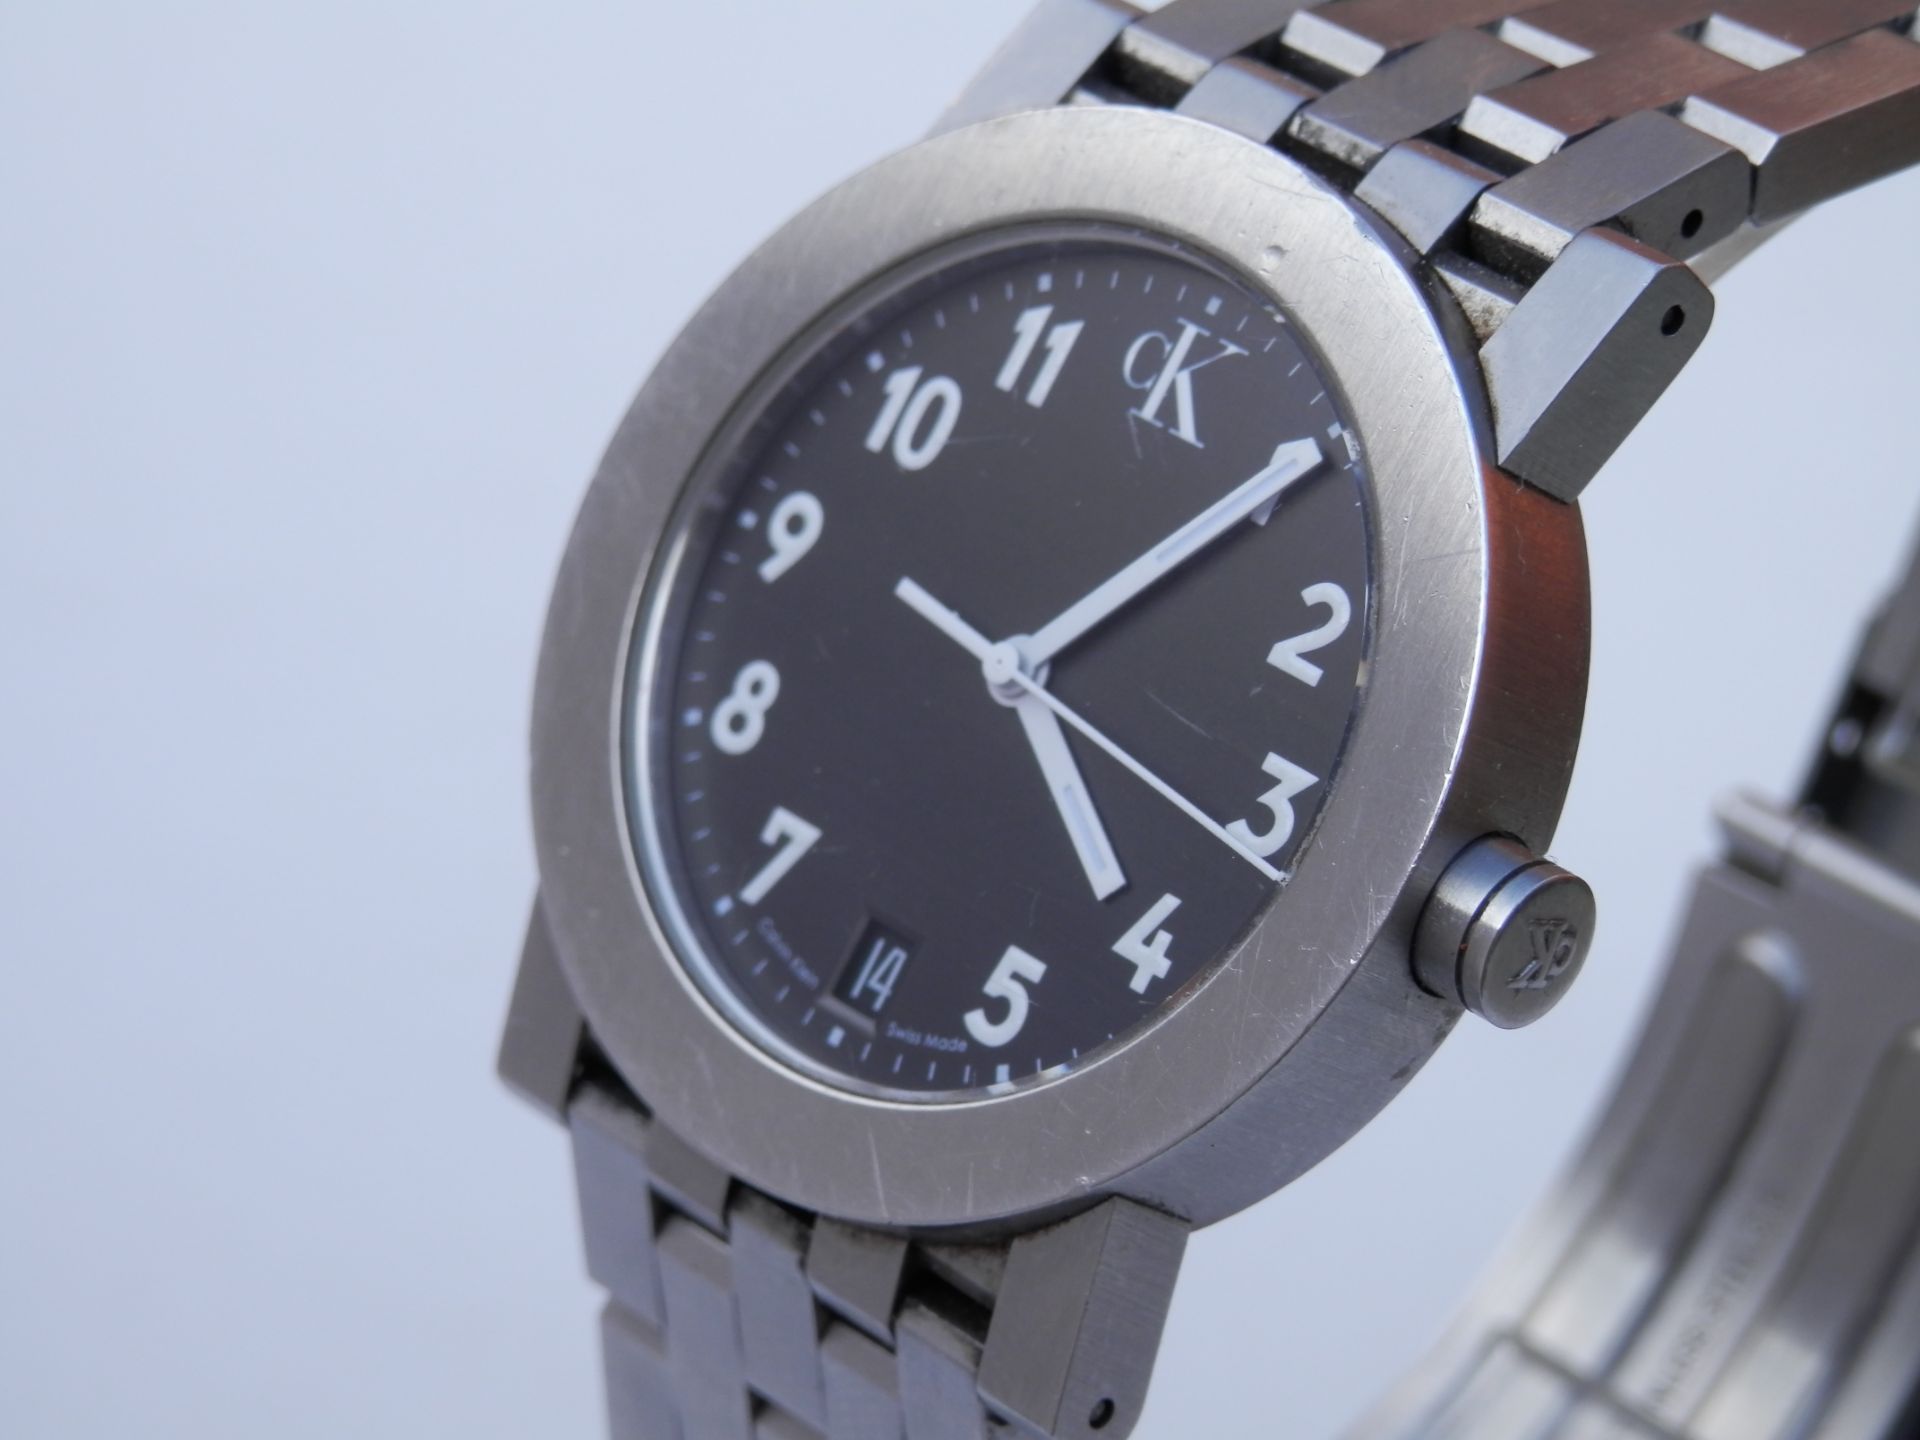 SUPERB SWISS GENTS 100% GENUINE CALVIN KLEIN K8111 FULL STAINLESS WATCH WITH MILITARY LOOK DIAL, - Image 4 of 12